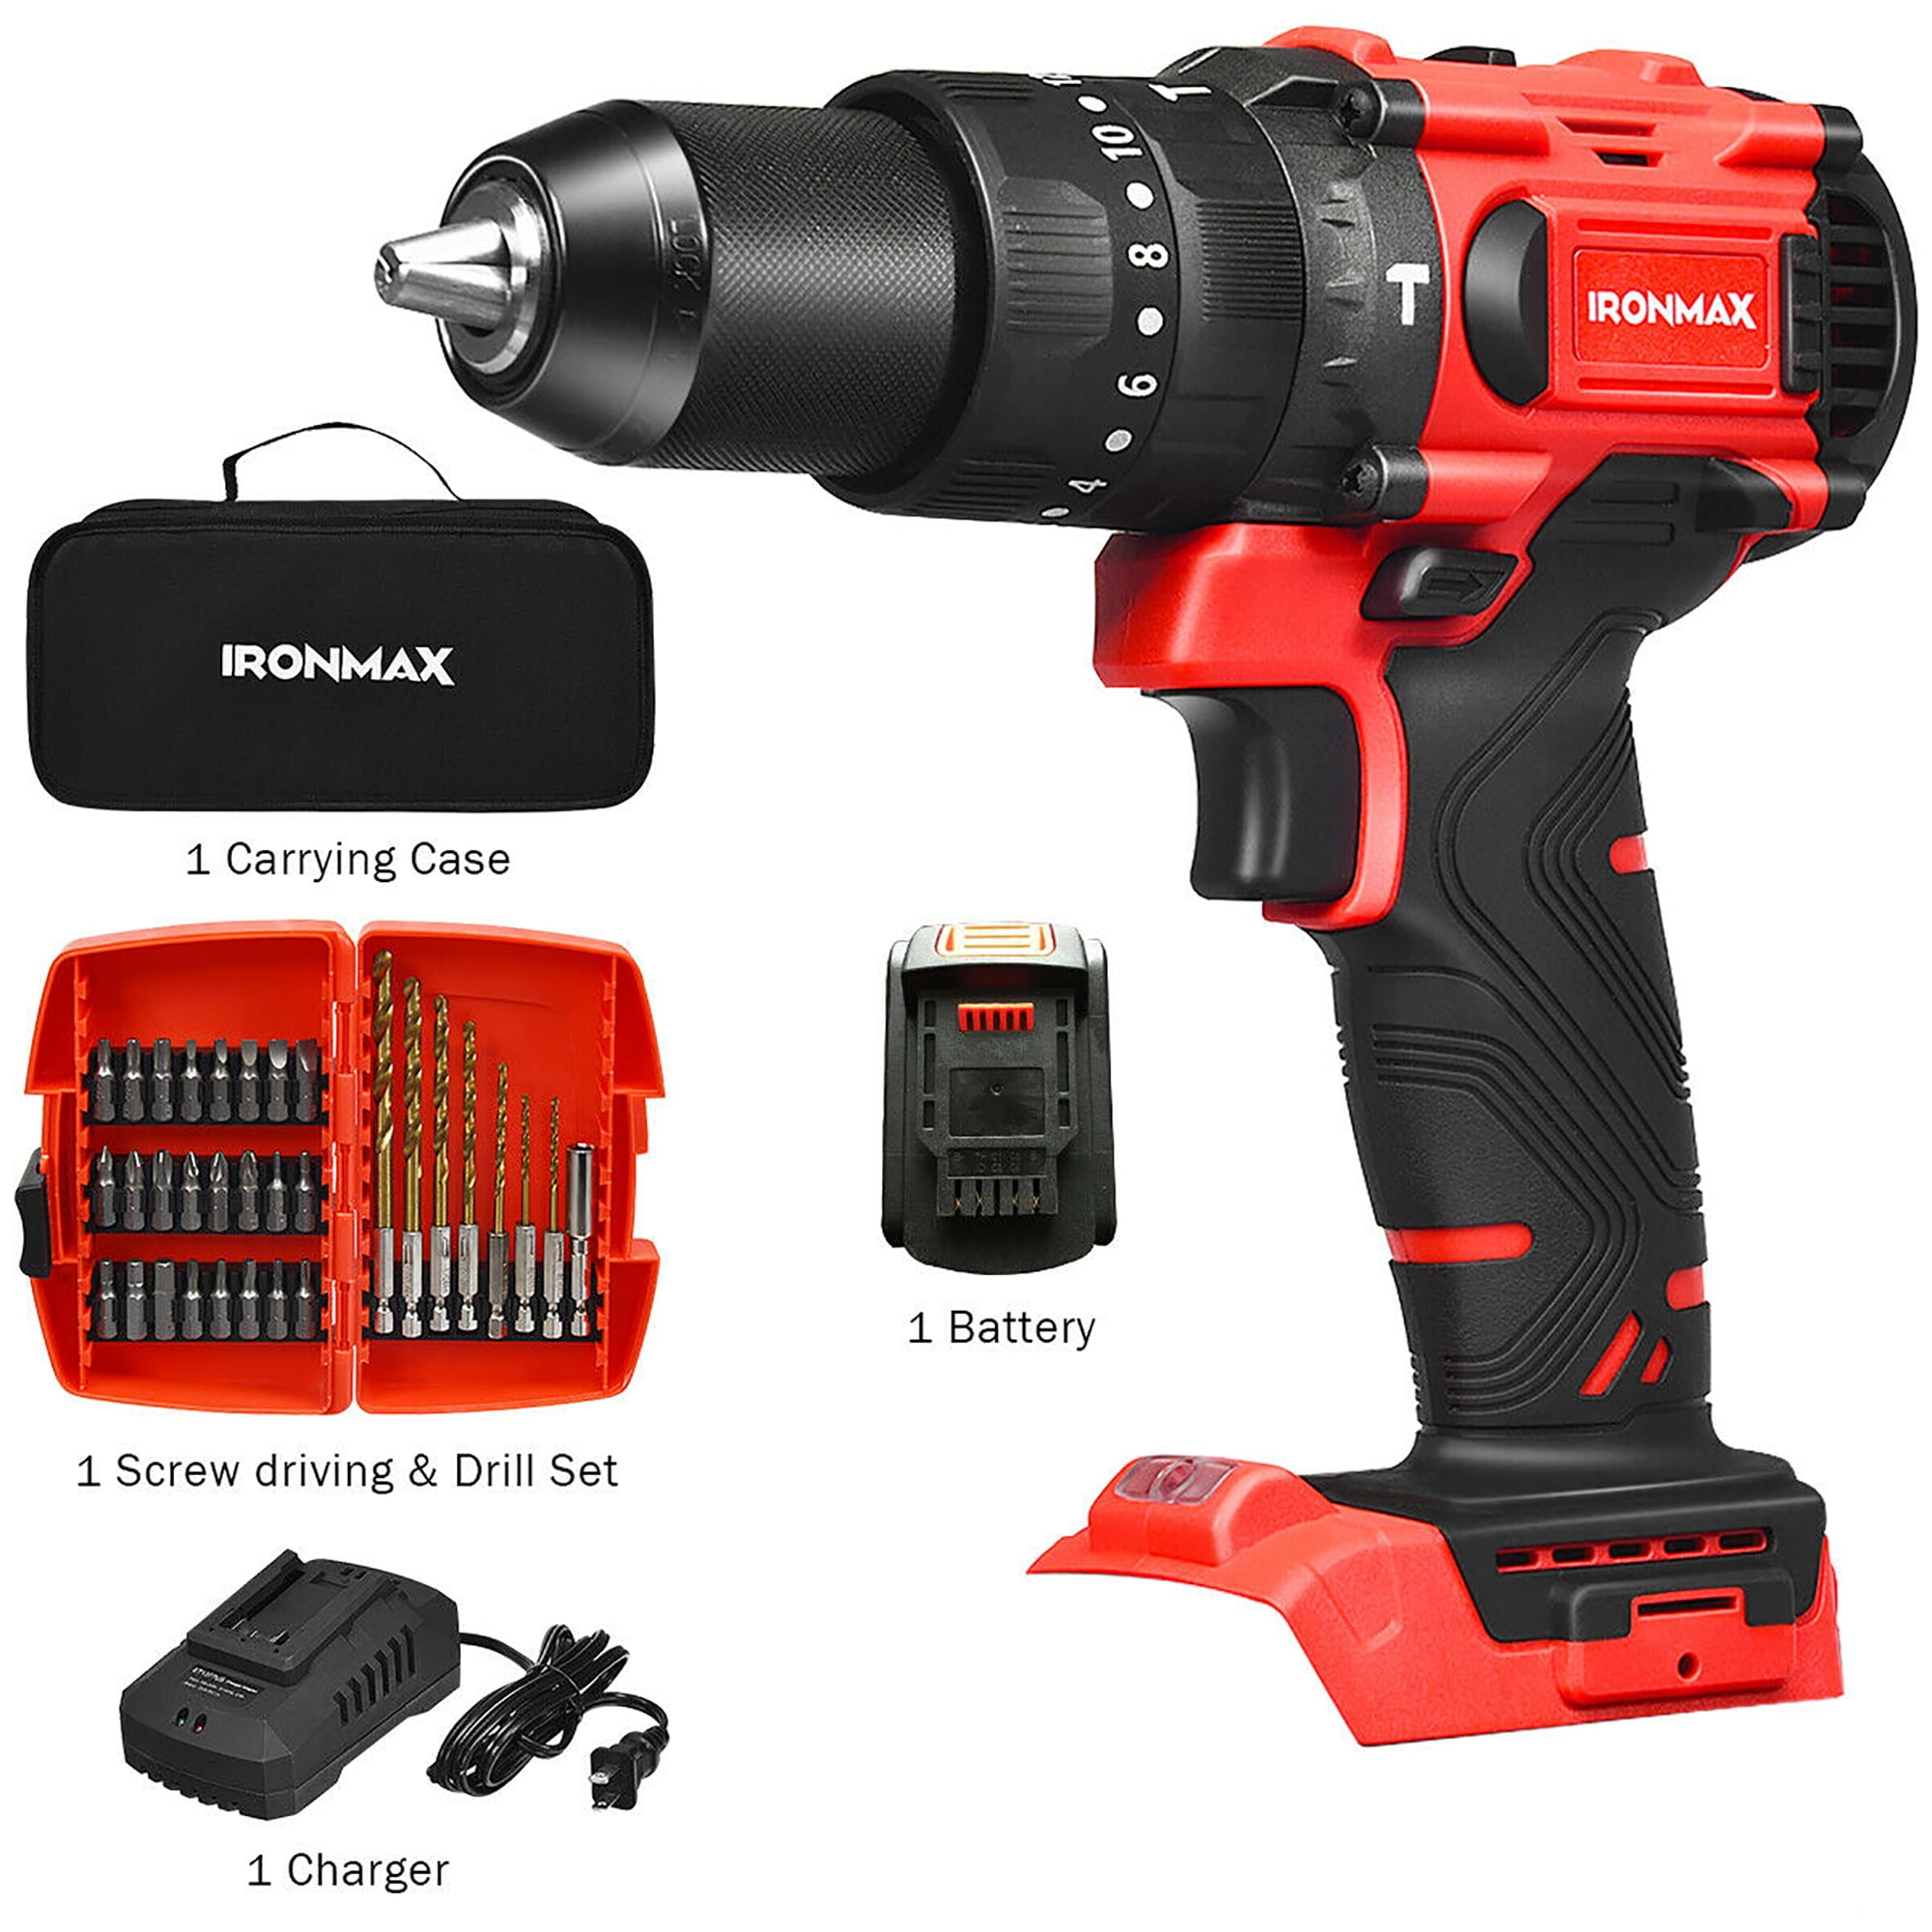 18V Brushless Cordless Hammer Drill/Driver Kit with 4.0&6.0 Ah Output Battery  18V 13mm Cordless Drill with Battery and Charger - AliExpress